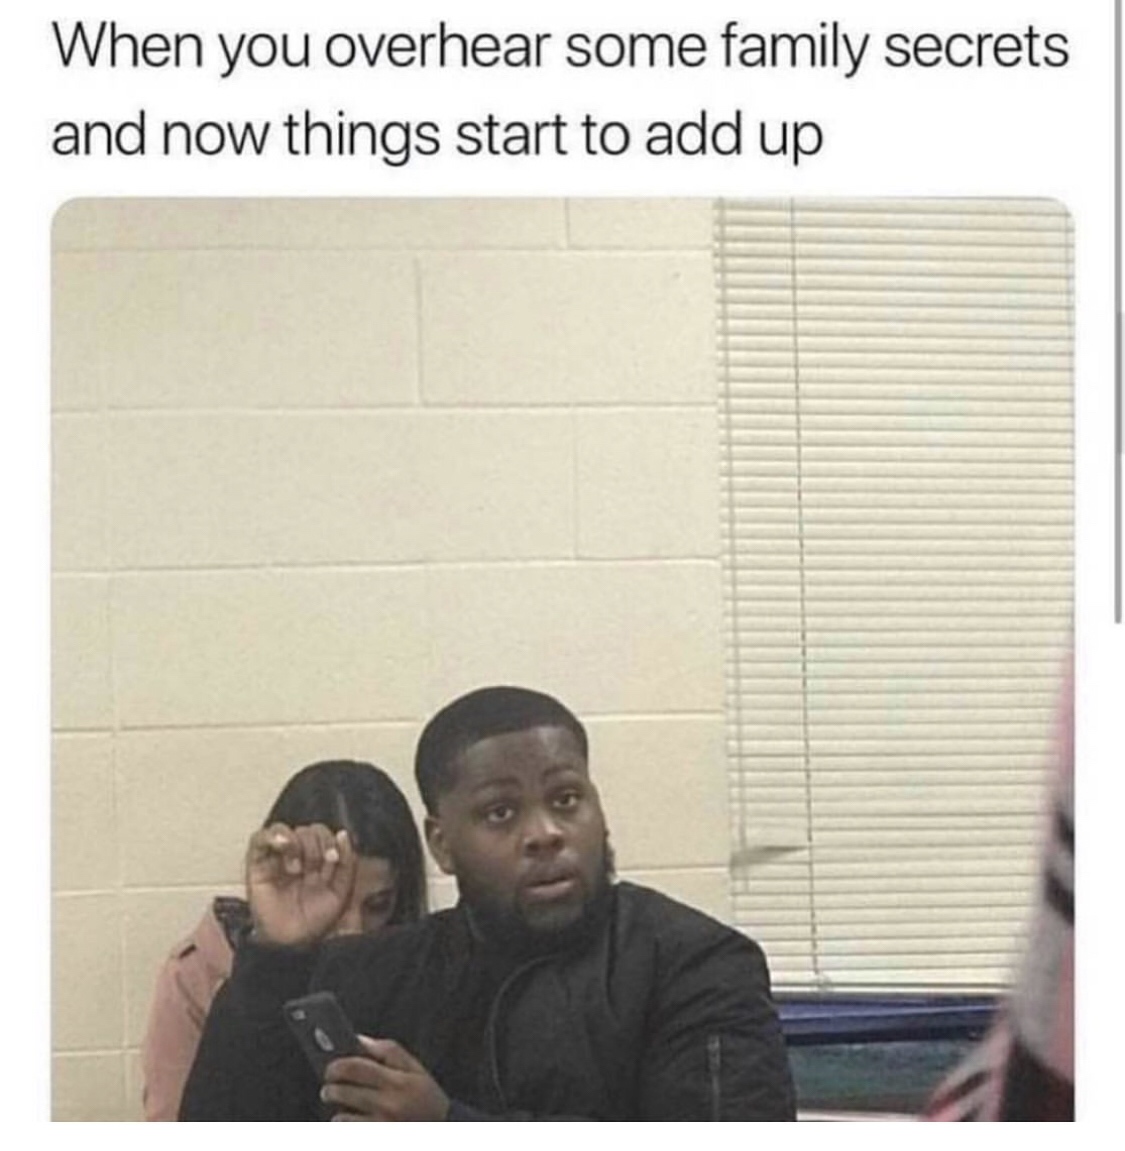 family secrets meme - When you overhear some family secrets and now things start to add up